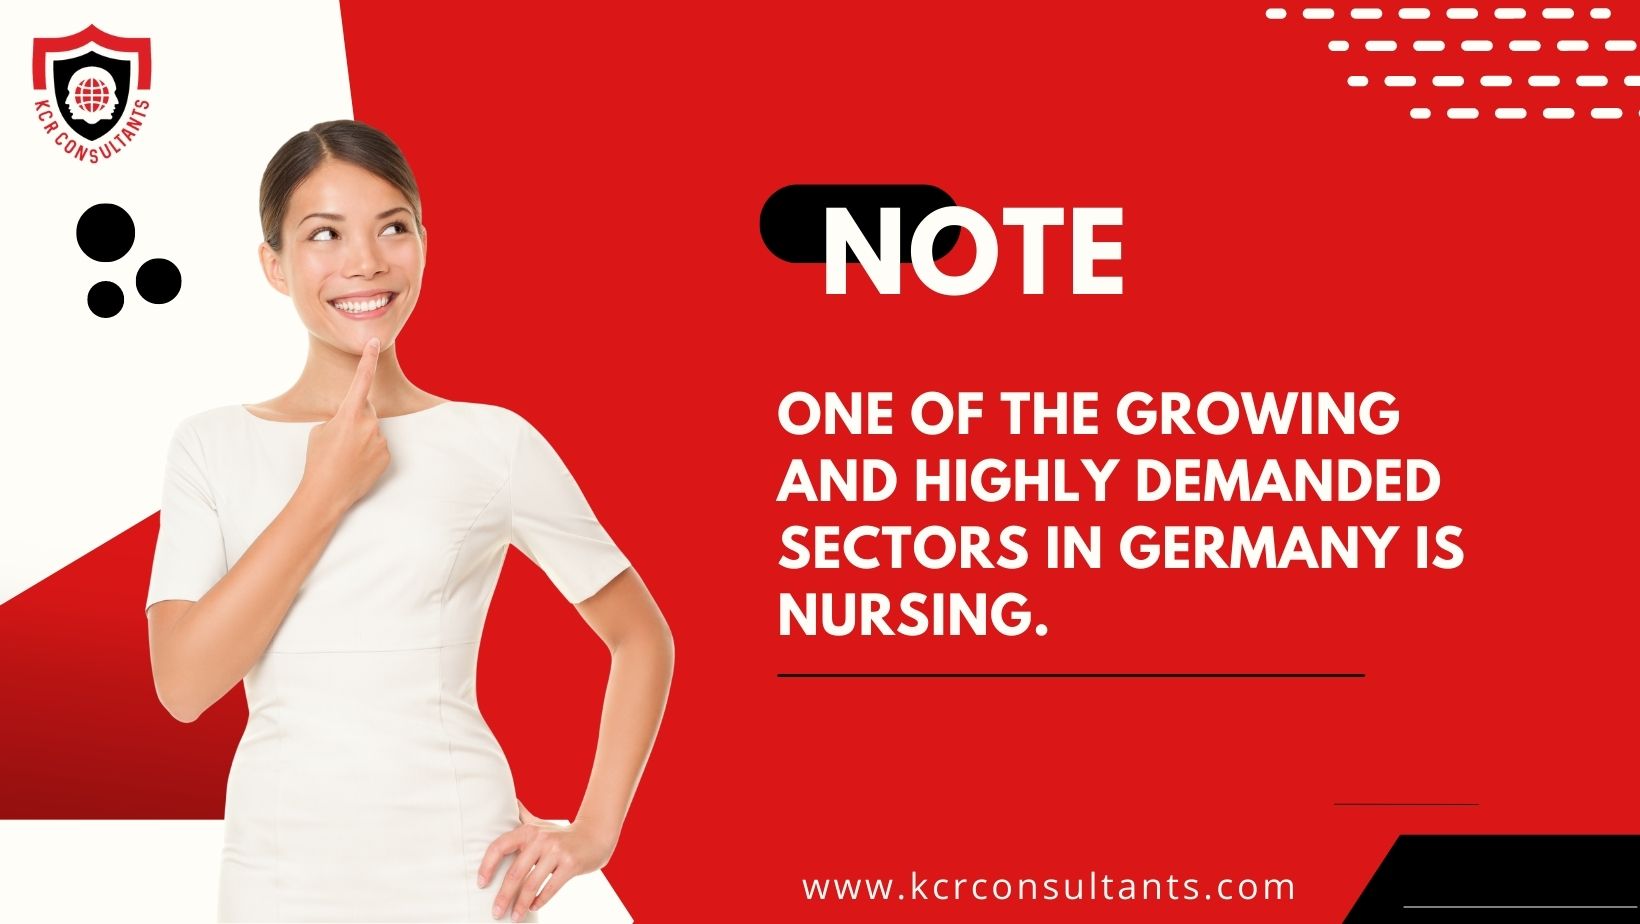 One of the growing and highly demanded sectors in Germany is nursing.